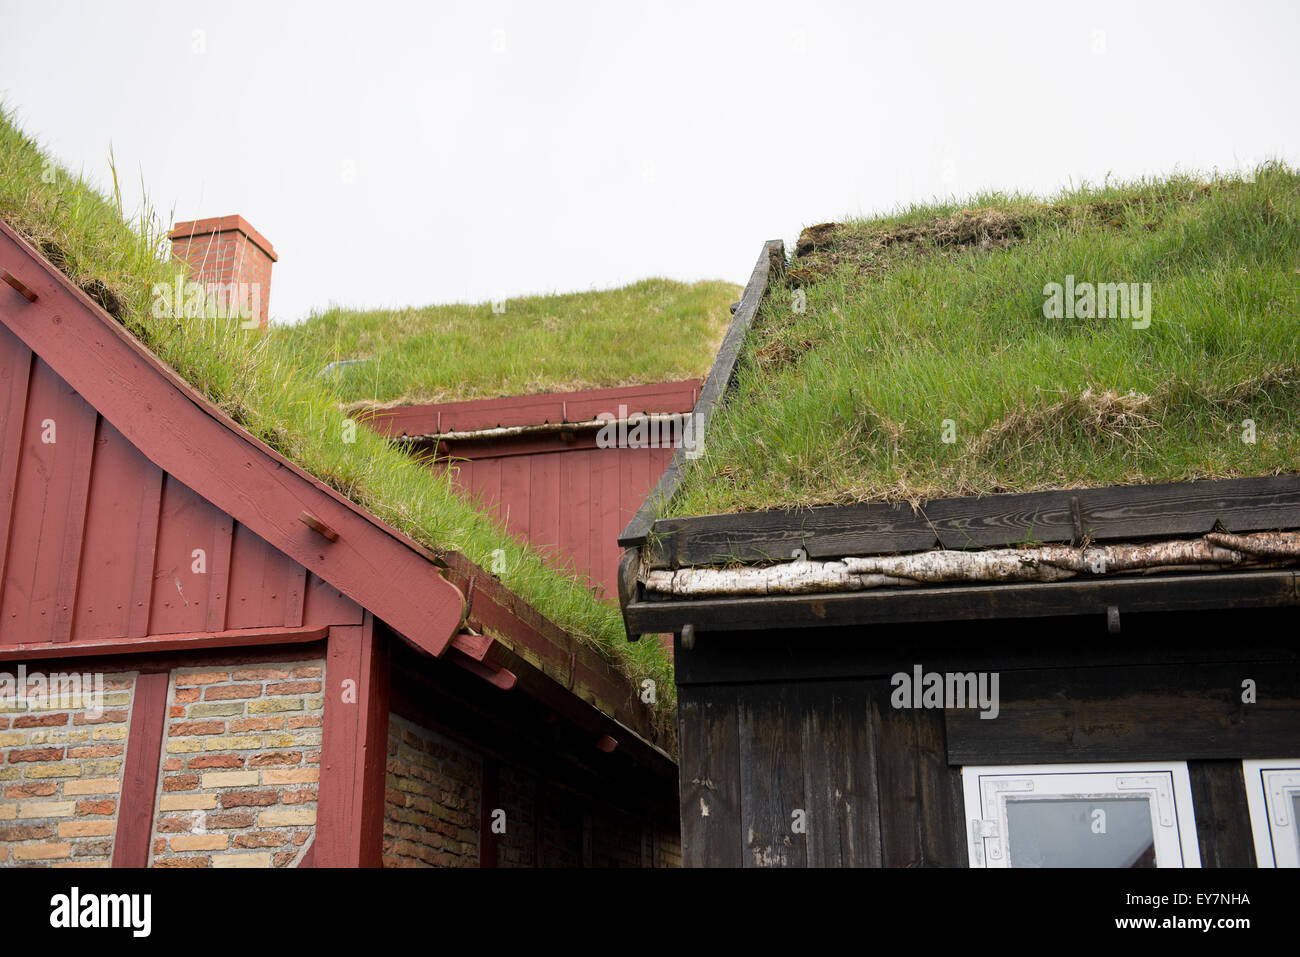 Grass roofs in Tinganes, the old town of Torshavn with red old wooden houses Stock Photo